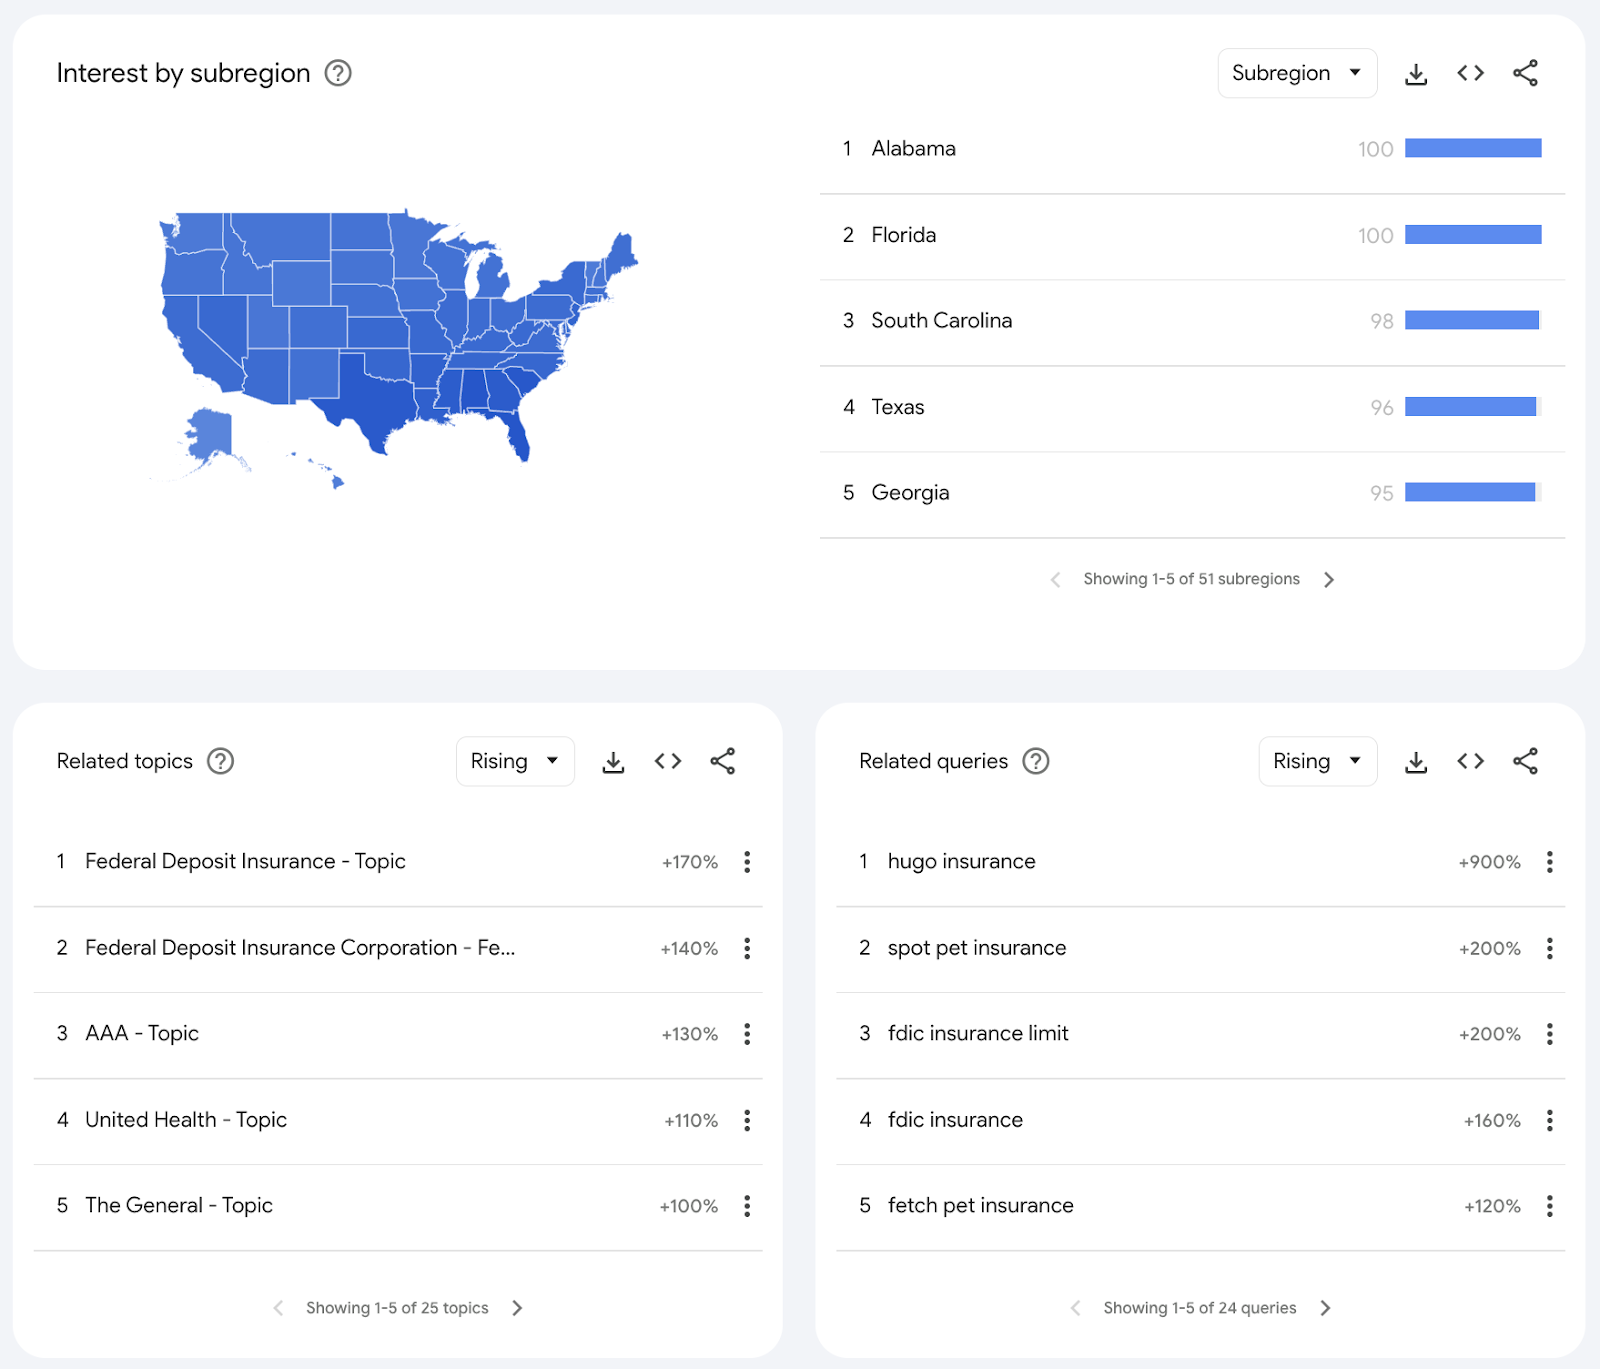 "Interest by subregion," "Related topics," and "Related queries" section for "insurance" in Google Trends